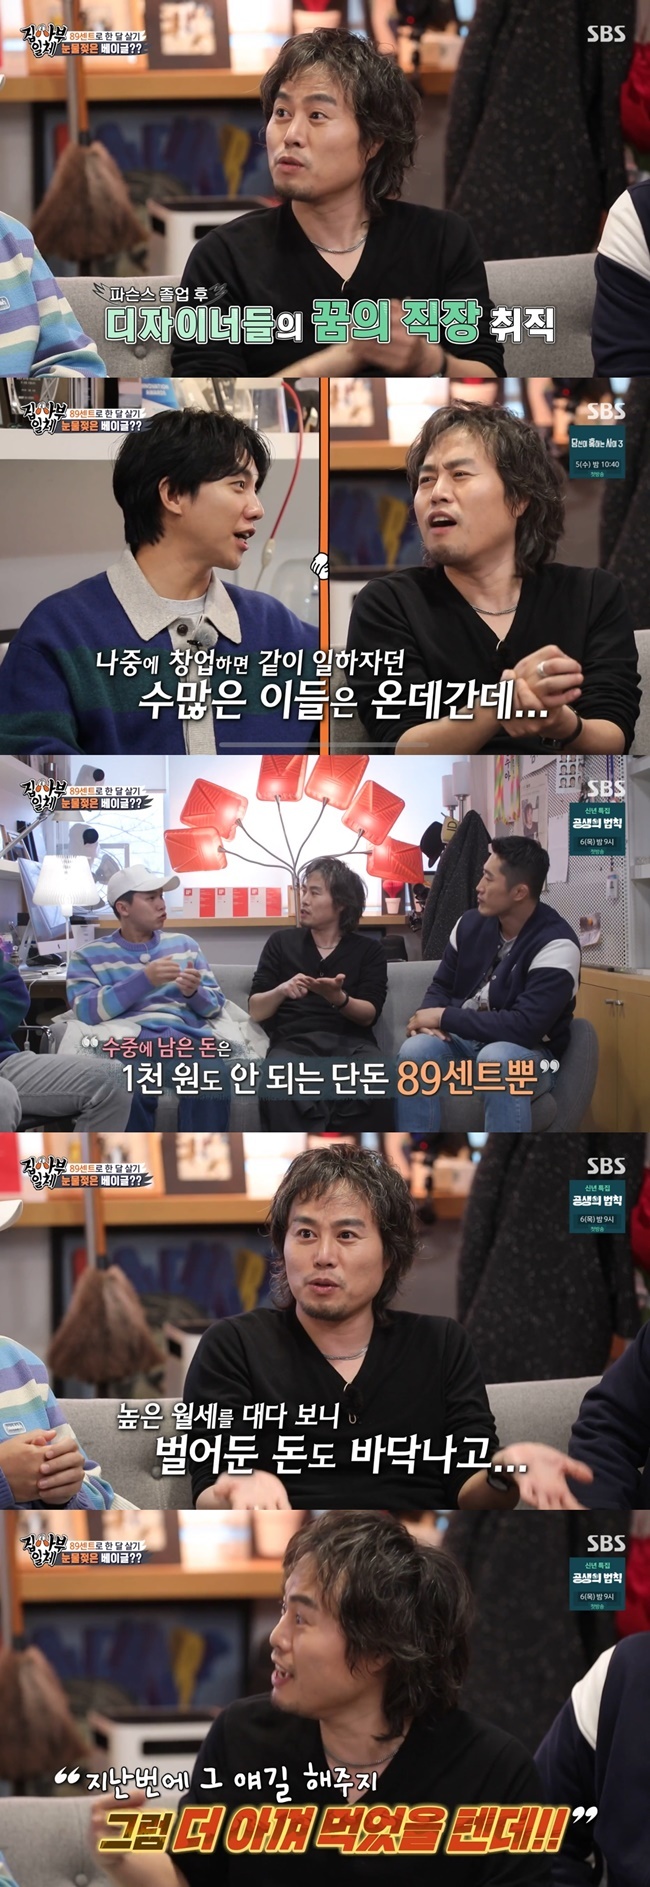 I recalled the days when Professor Club Reparation was tough.In SBS All The Butlers broadcast on January 2, Professor Reparation, a professor of Club Industrial Design and president of L Company Design Center, appeared as master.Lee Seung-gi said, When I heard the story, I think both the students and the professors were solid, and Professor Reparation said, No.There are so many things I want to erase in my life. Professor Bae said, After graduating, I got a job in a good place. I got a job where all Desiigner wanted to go.I resigned nicely to the company and set up an office, but Friend betrayed me. It was my best friend.I set up a company with my client and my brother with my idea. It was hard, I had to do it alone, but I told him to contact me later, but he didnt work. He didnt make any income for six months.So I spent all my money. I paid my last monthly rent and I had 89 cents left. Its about 900 won in Hanhwa.Im hungry if theres no money in the strangest person. Bagel was the cheapest. Once I ate and thought, I saved two for three days. Professor Bae said, I tried to buy one more bagel with the remaining money, and I did not sell one.I saved more if I told you that last time. It was really miserable to come up with this story. So I had a phone call at the moment without any measures.I heard that a large Japanese cosmetics company is good at packaging, but I asked if I could do it. I pretended to have a schedule and started to survive in five minutes. 